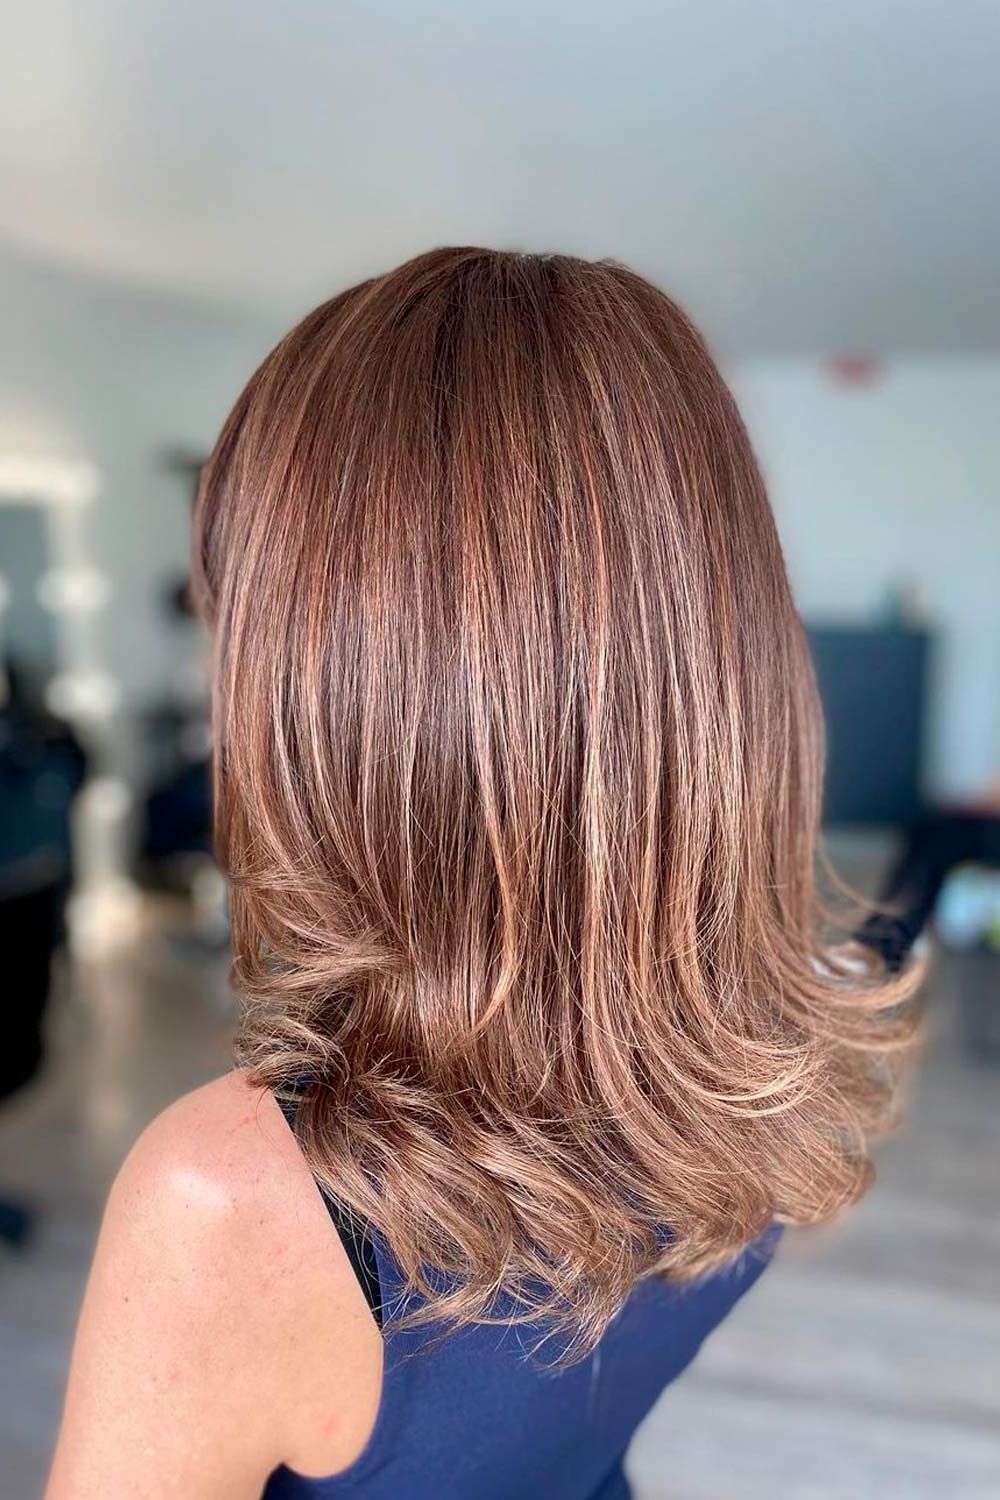 32 Ash Brown Hair Sassy Looks 2022 – Love Hairstyles Throughout Most Popular Lob Haircuts With Ash Blonde Highlights (View 15 of 25)